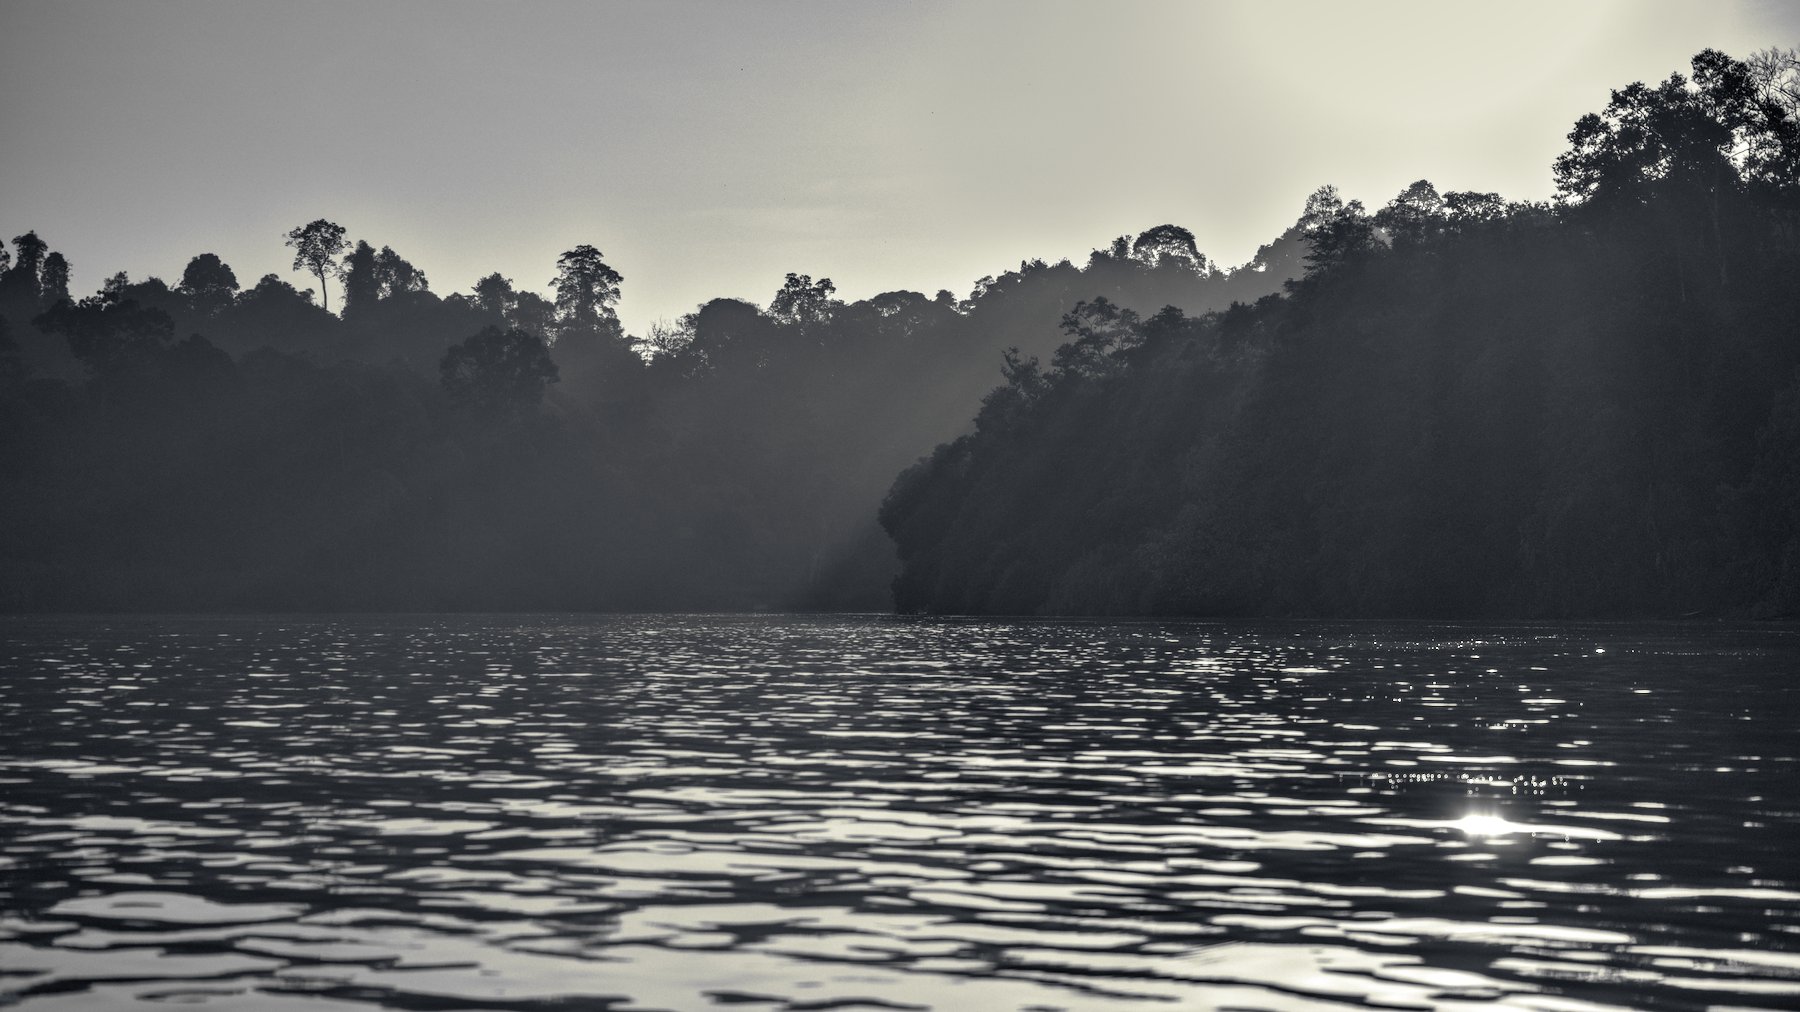 Early morning on a river in Borneo